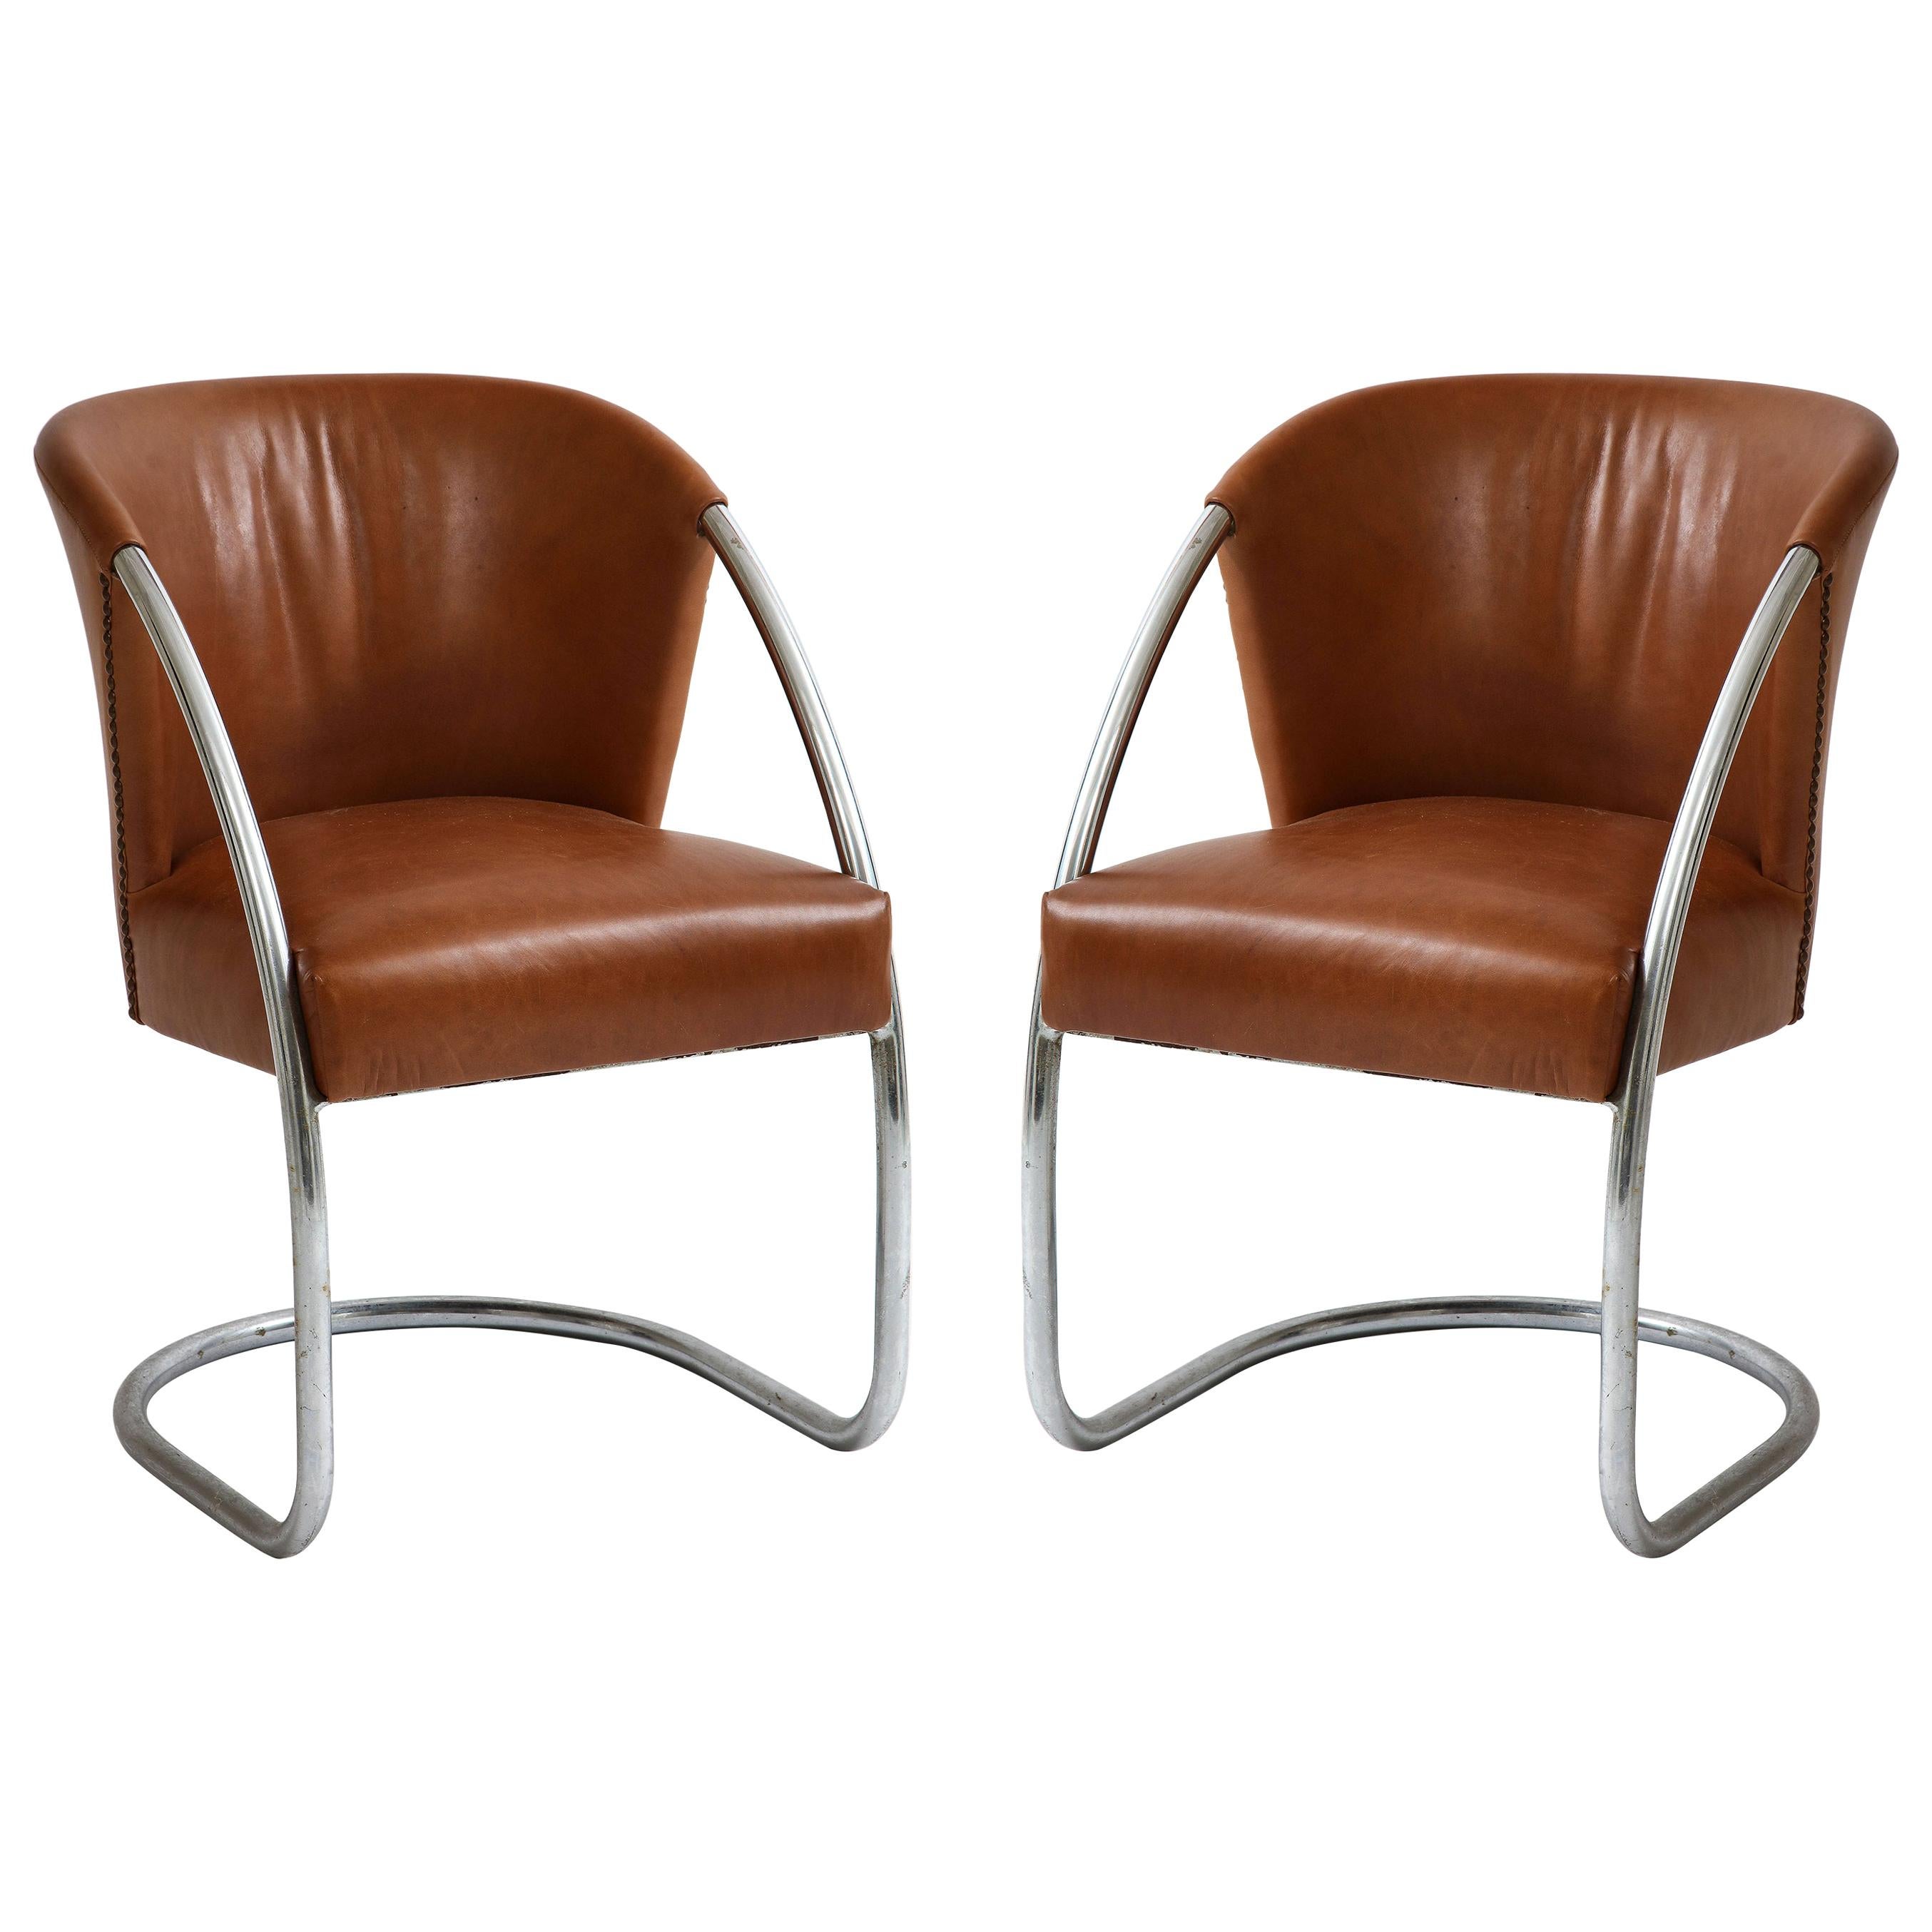 Jacques Adnet Pair of Brown Leather Chrome Chairs, France, 1932